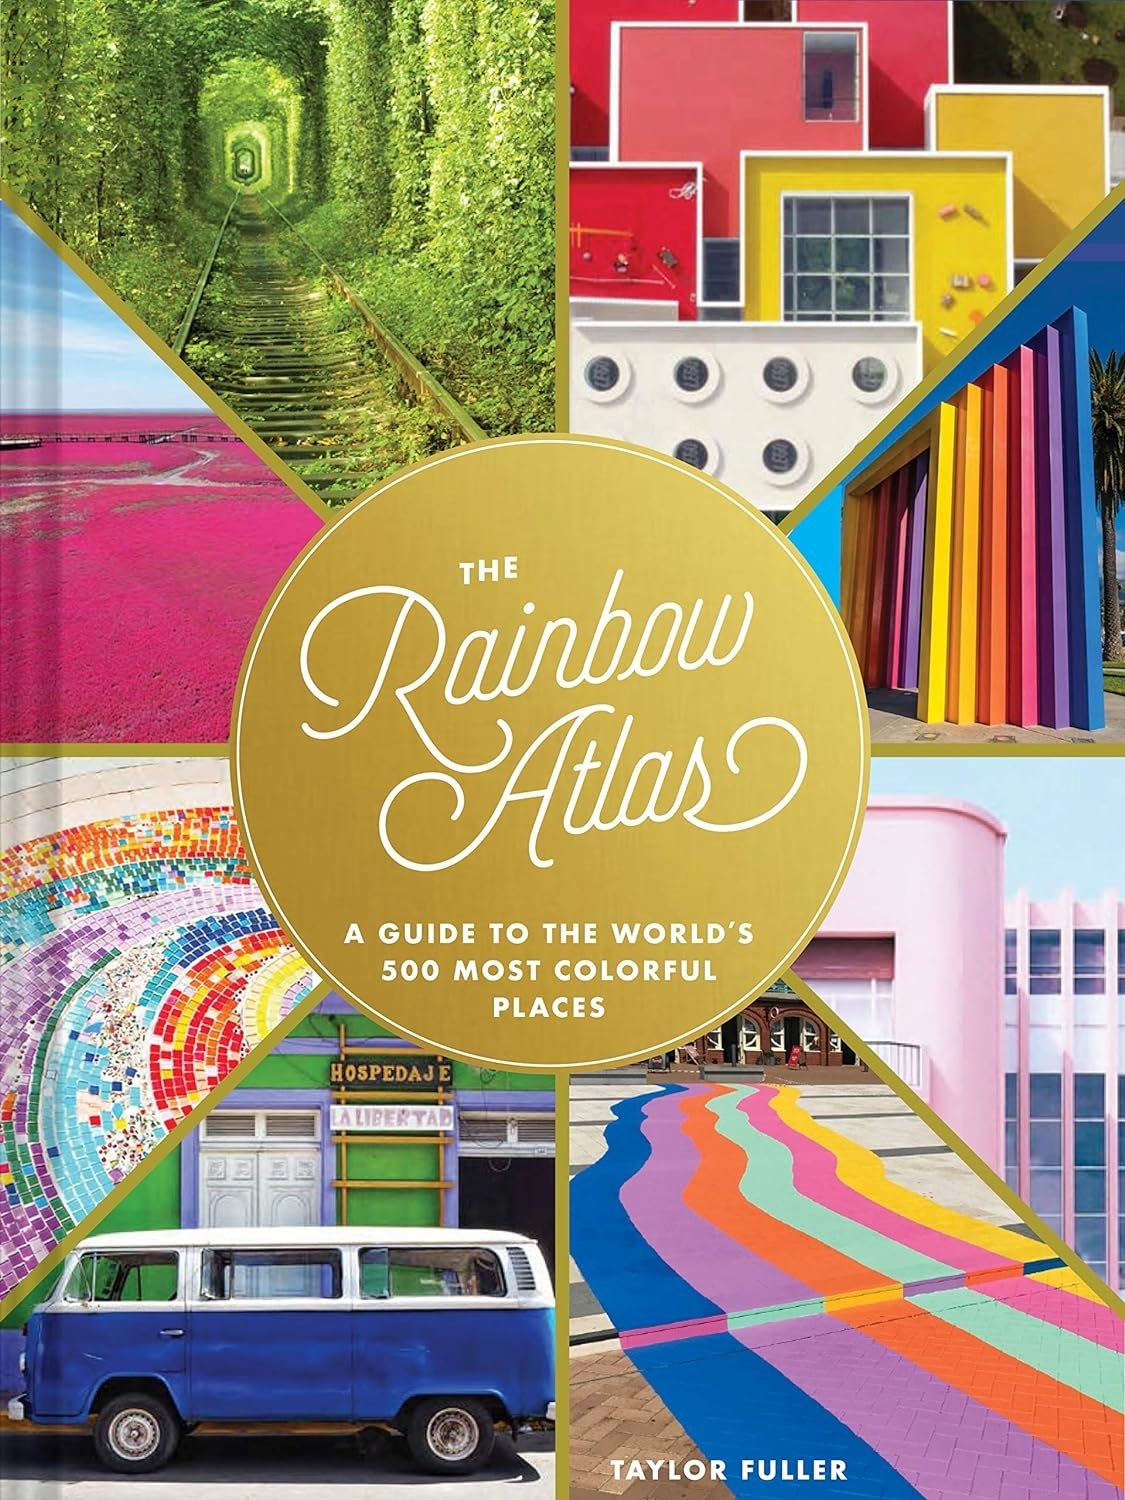 Book cover of &quot;The Rainbow Atlas&quot; with a collage of colorful travel locations